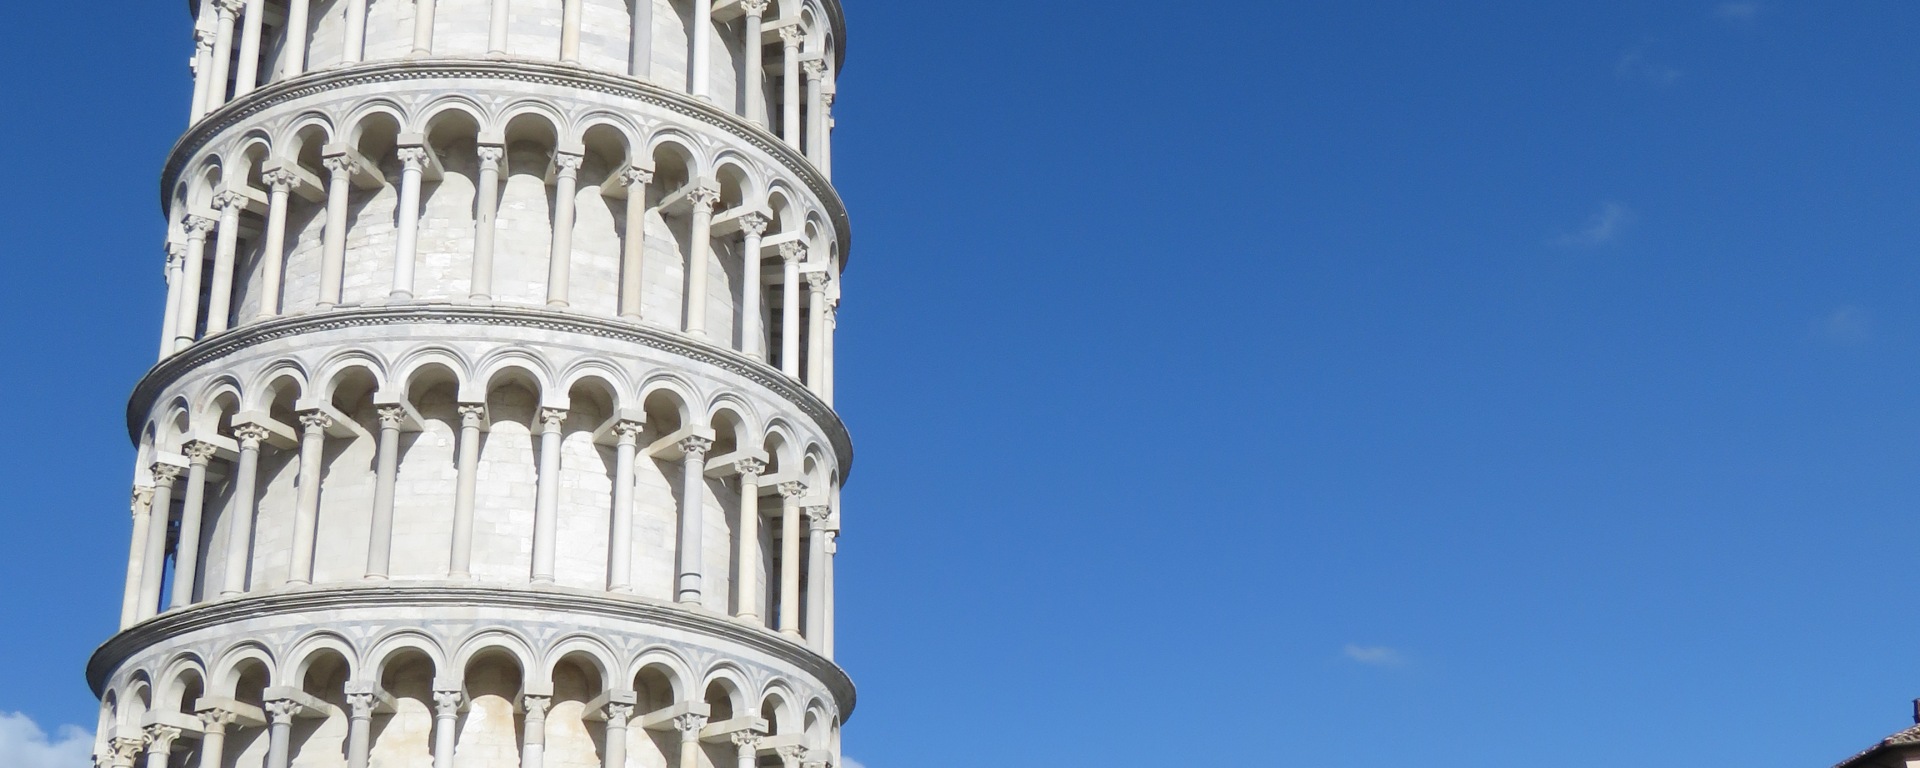 There it is - Leaning Tower of Pisa, Italy - by Anika Mikkelson - Miss Maps - www.MissMaps.com